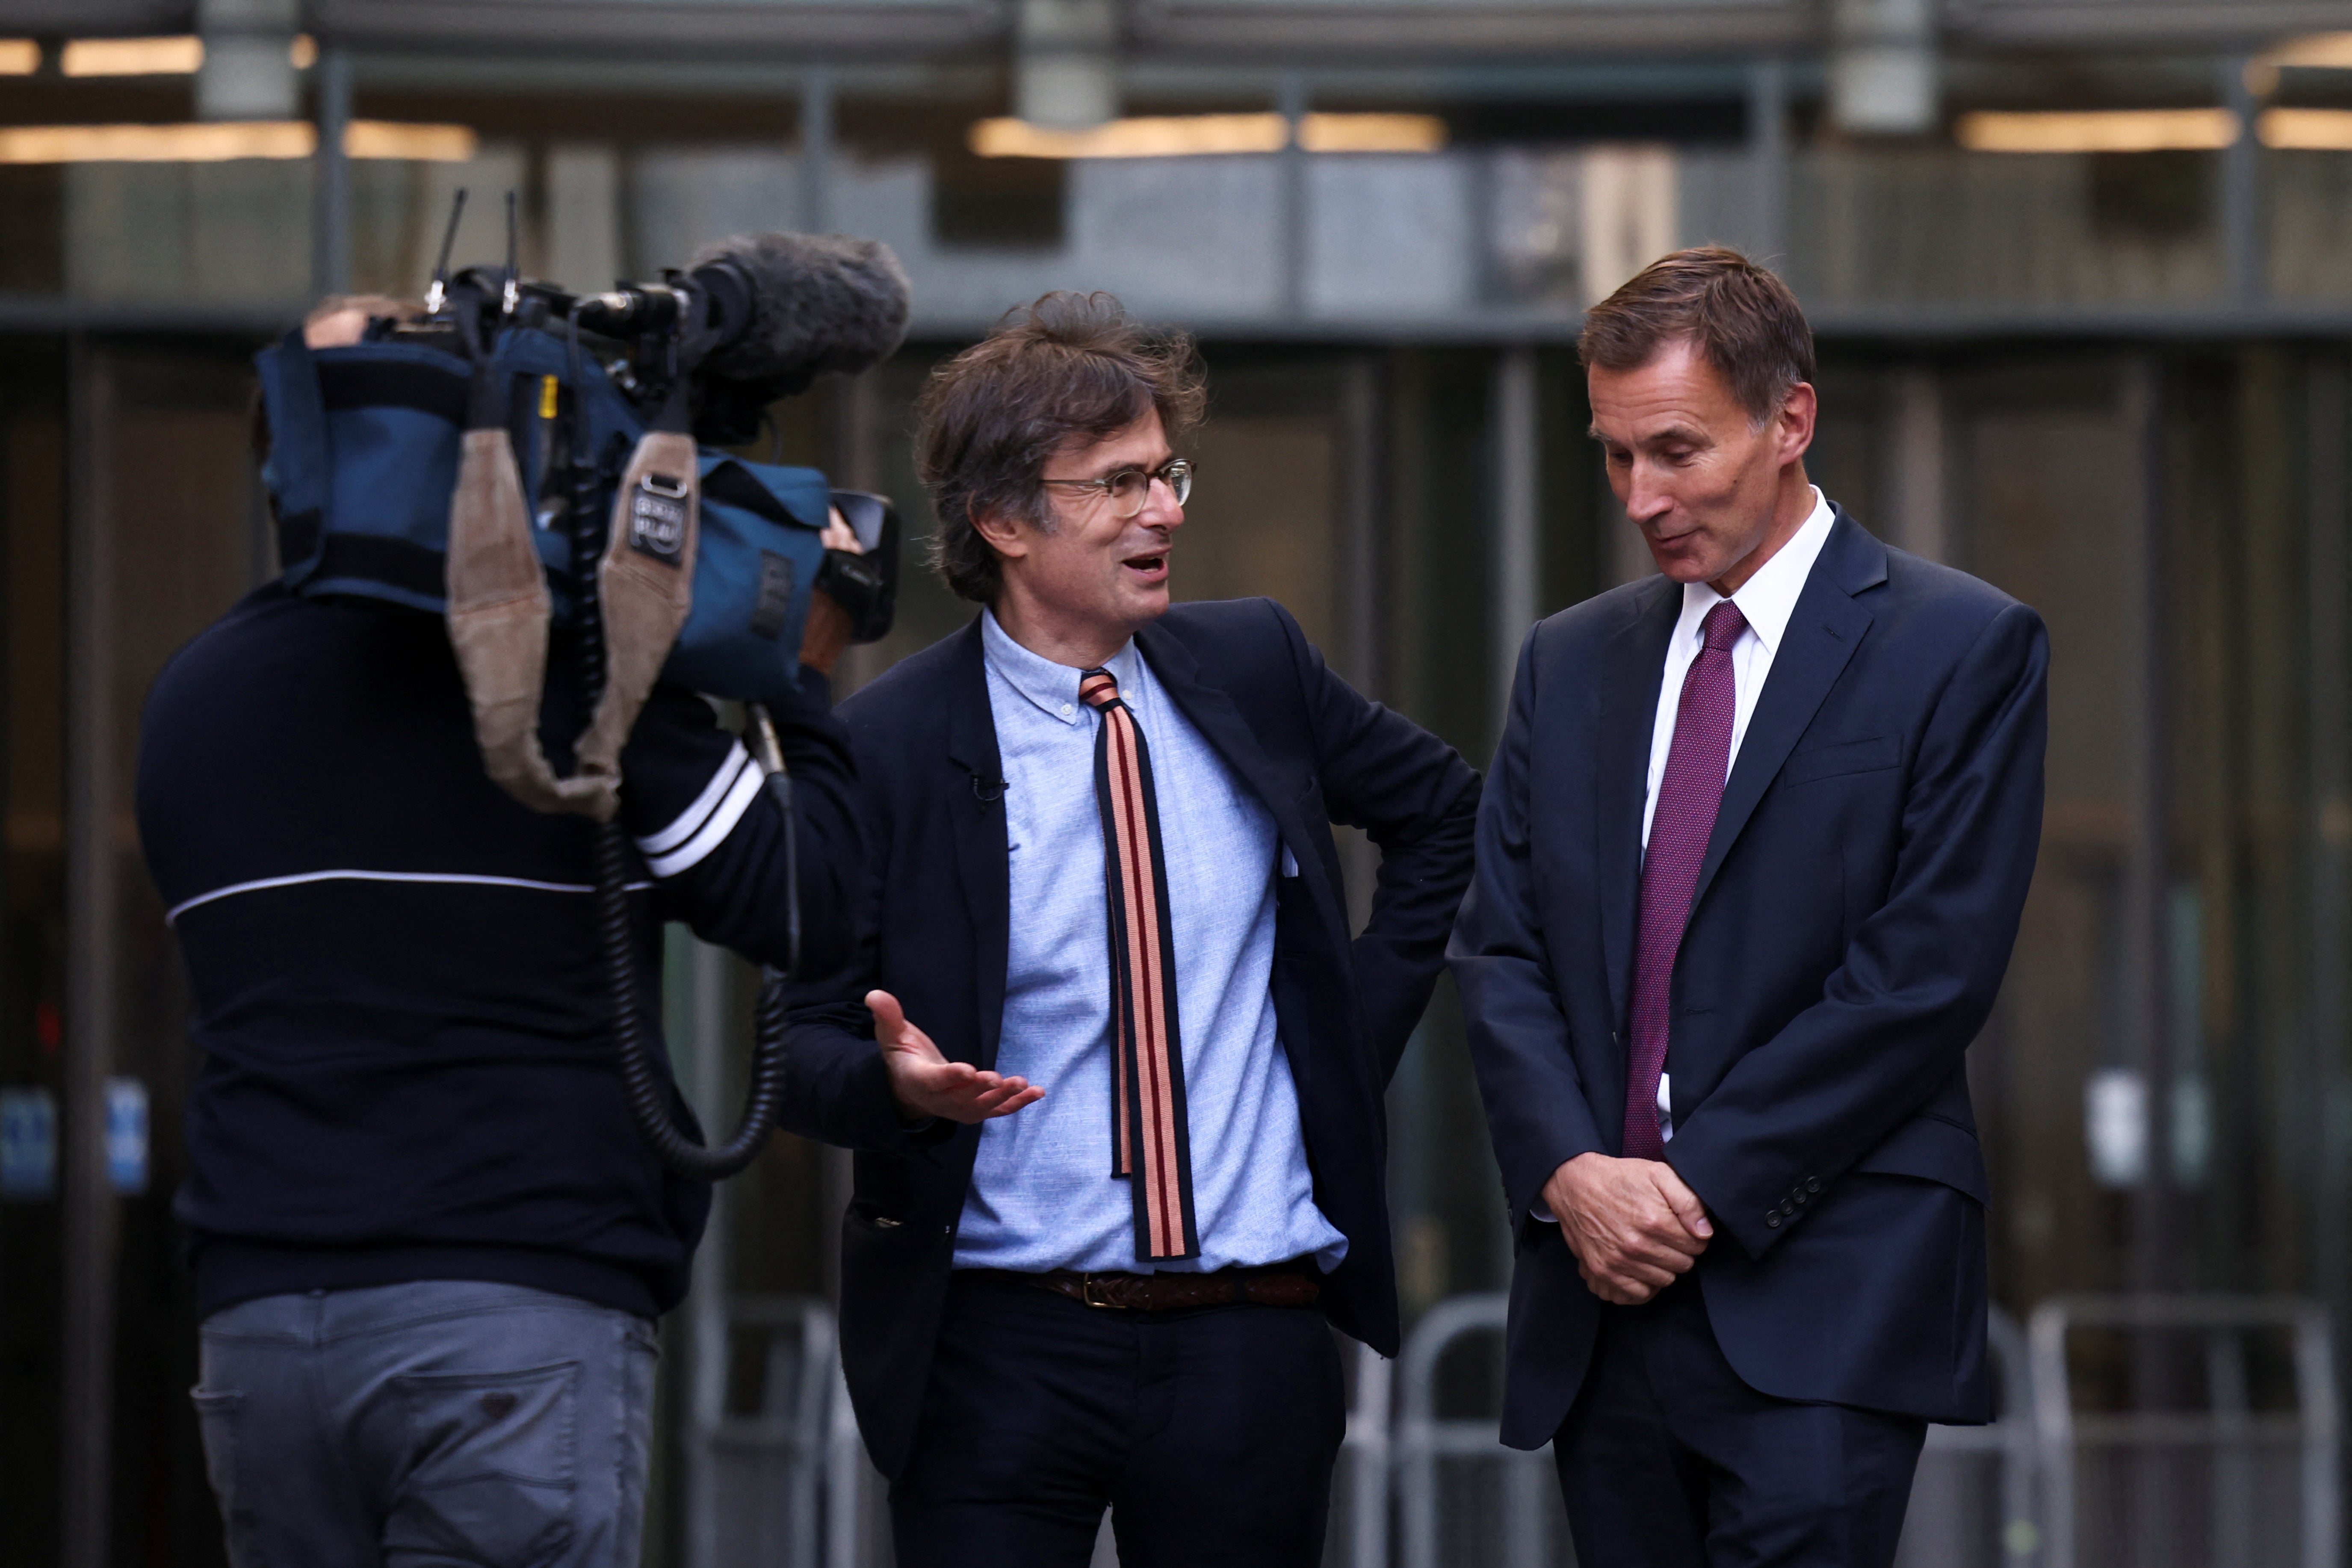 Jeremy Hunt is interviewed by Robert Peston on Saturday, his first full day as chancellor